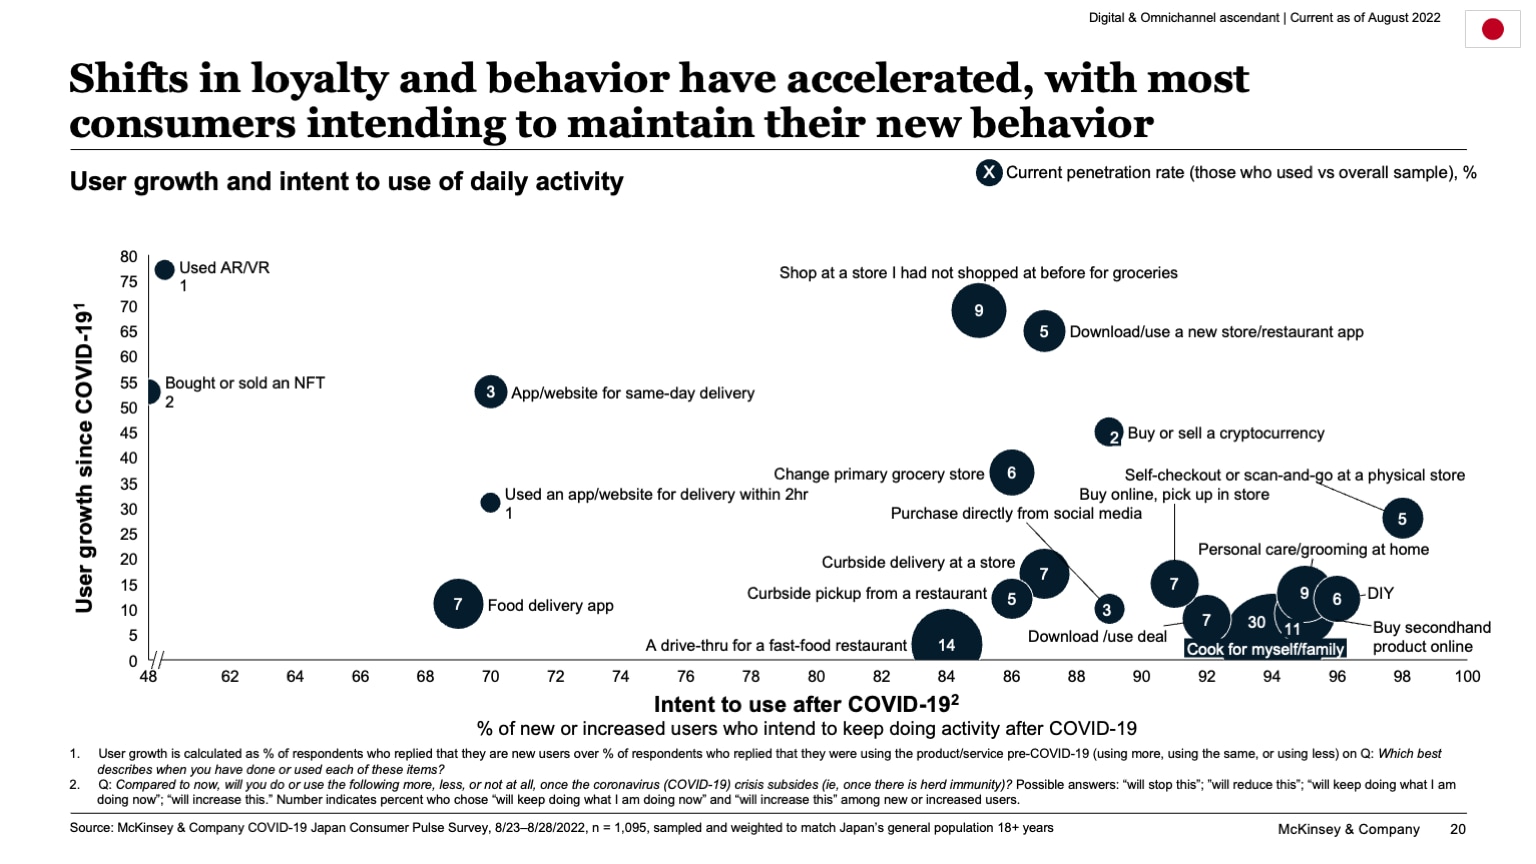 Shifts in loyalty and behavior have accelerated, with most consumers intending to maintain their new behavior